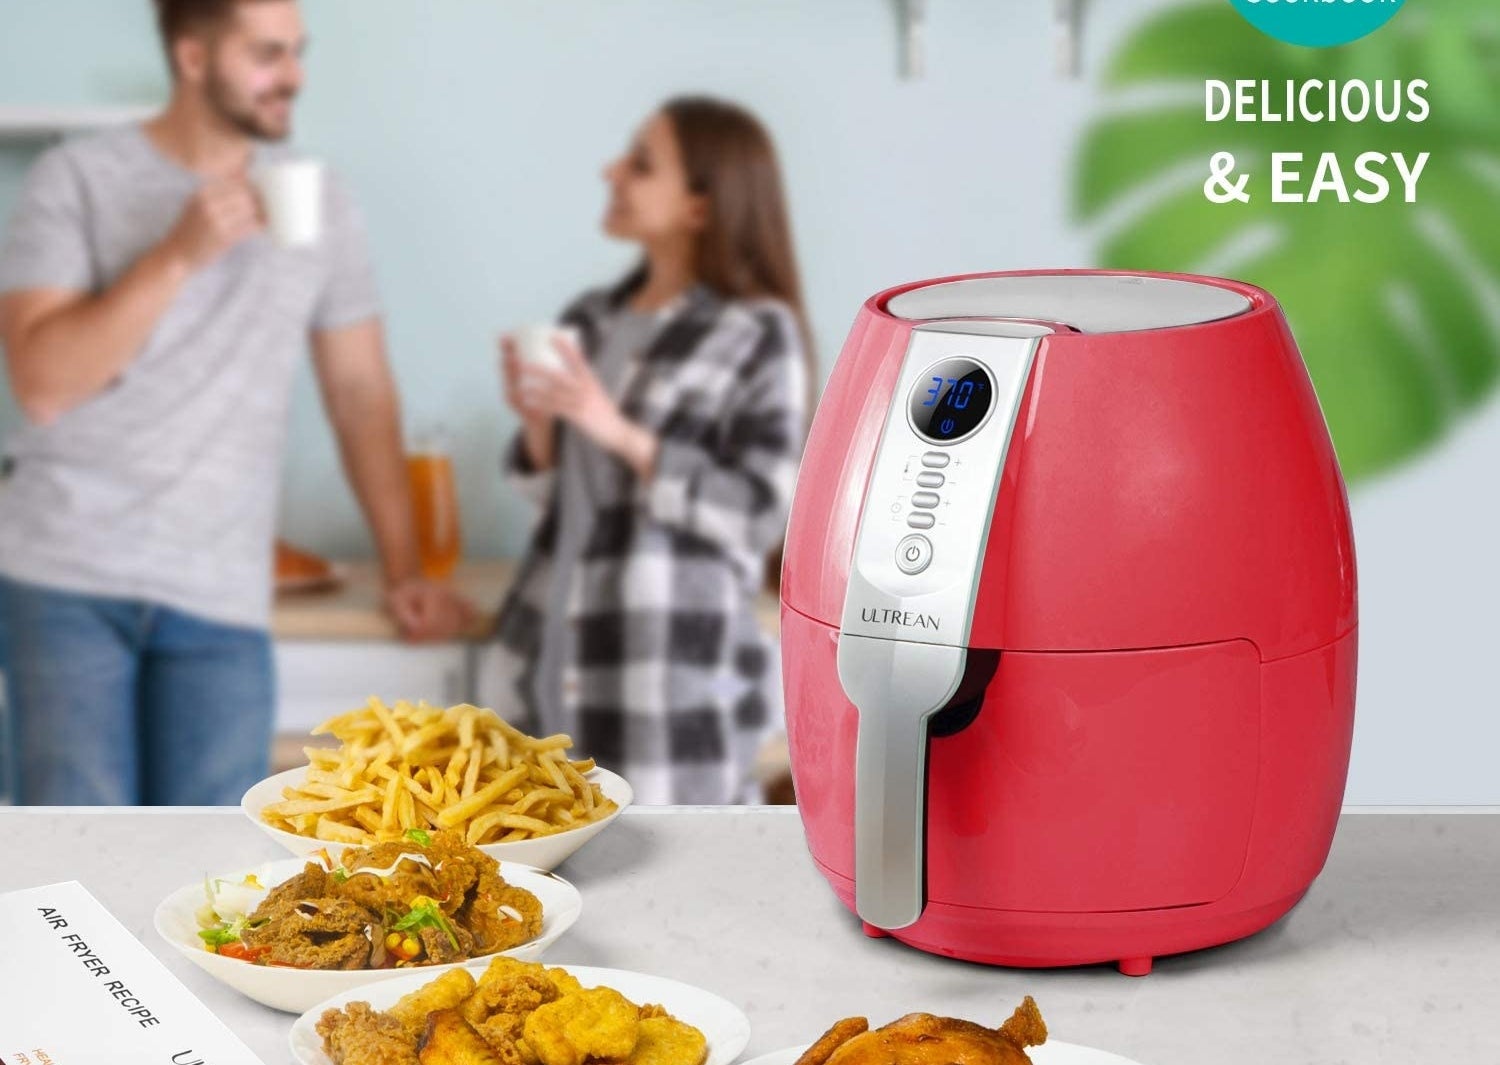 The red air fryer on a counter next to plates of fries, chicken, and other foods